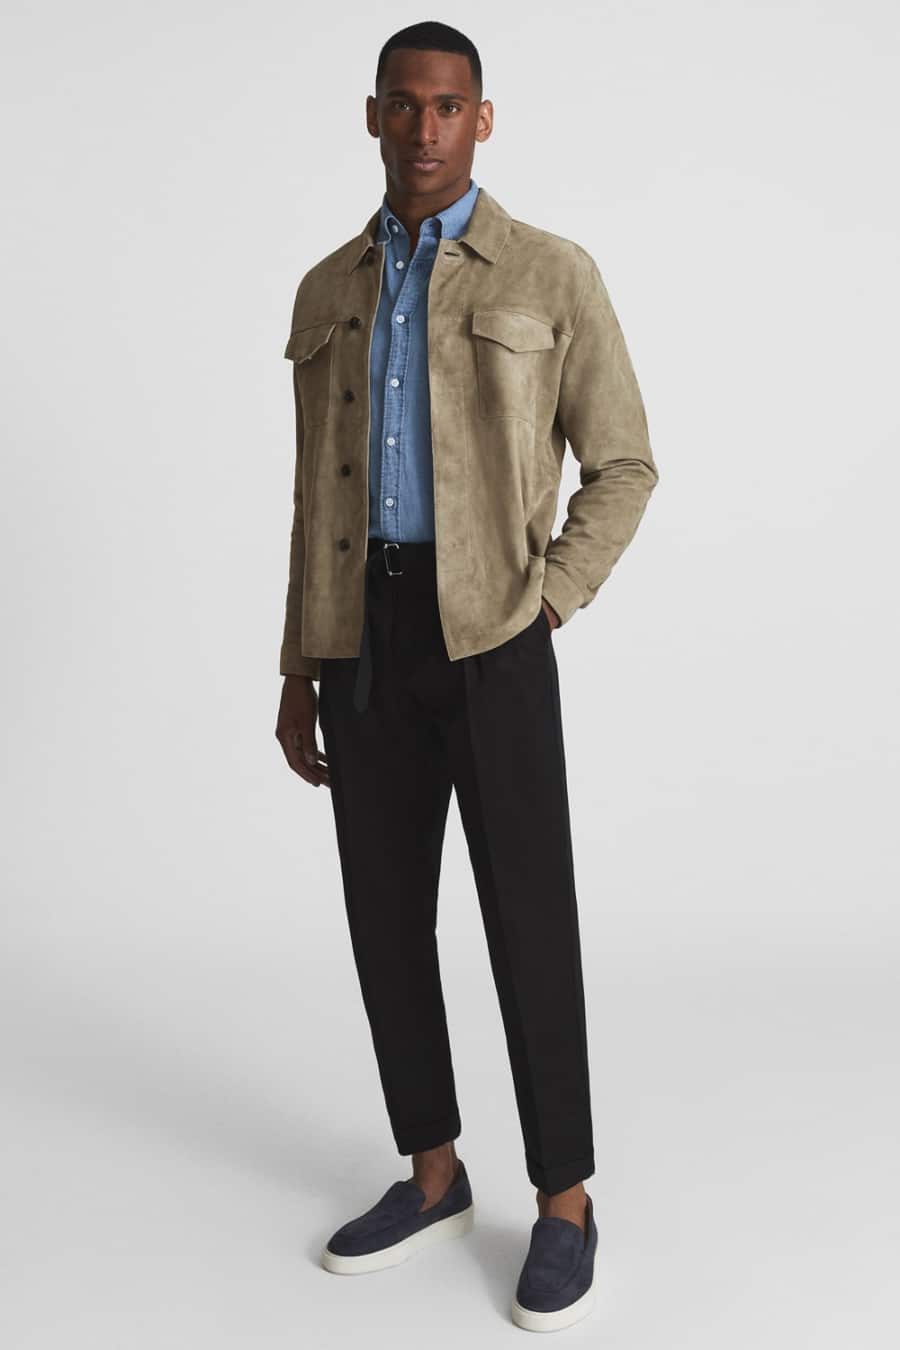 Men's black trousers, blue denim shirt, taupe suede overshirt and navy suede loafers outfit